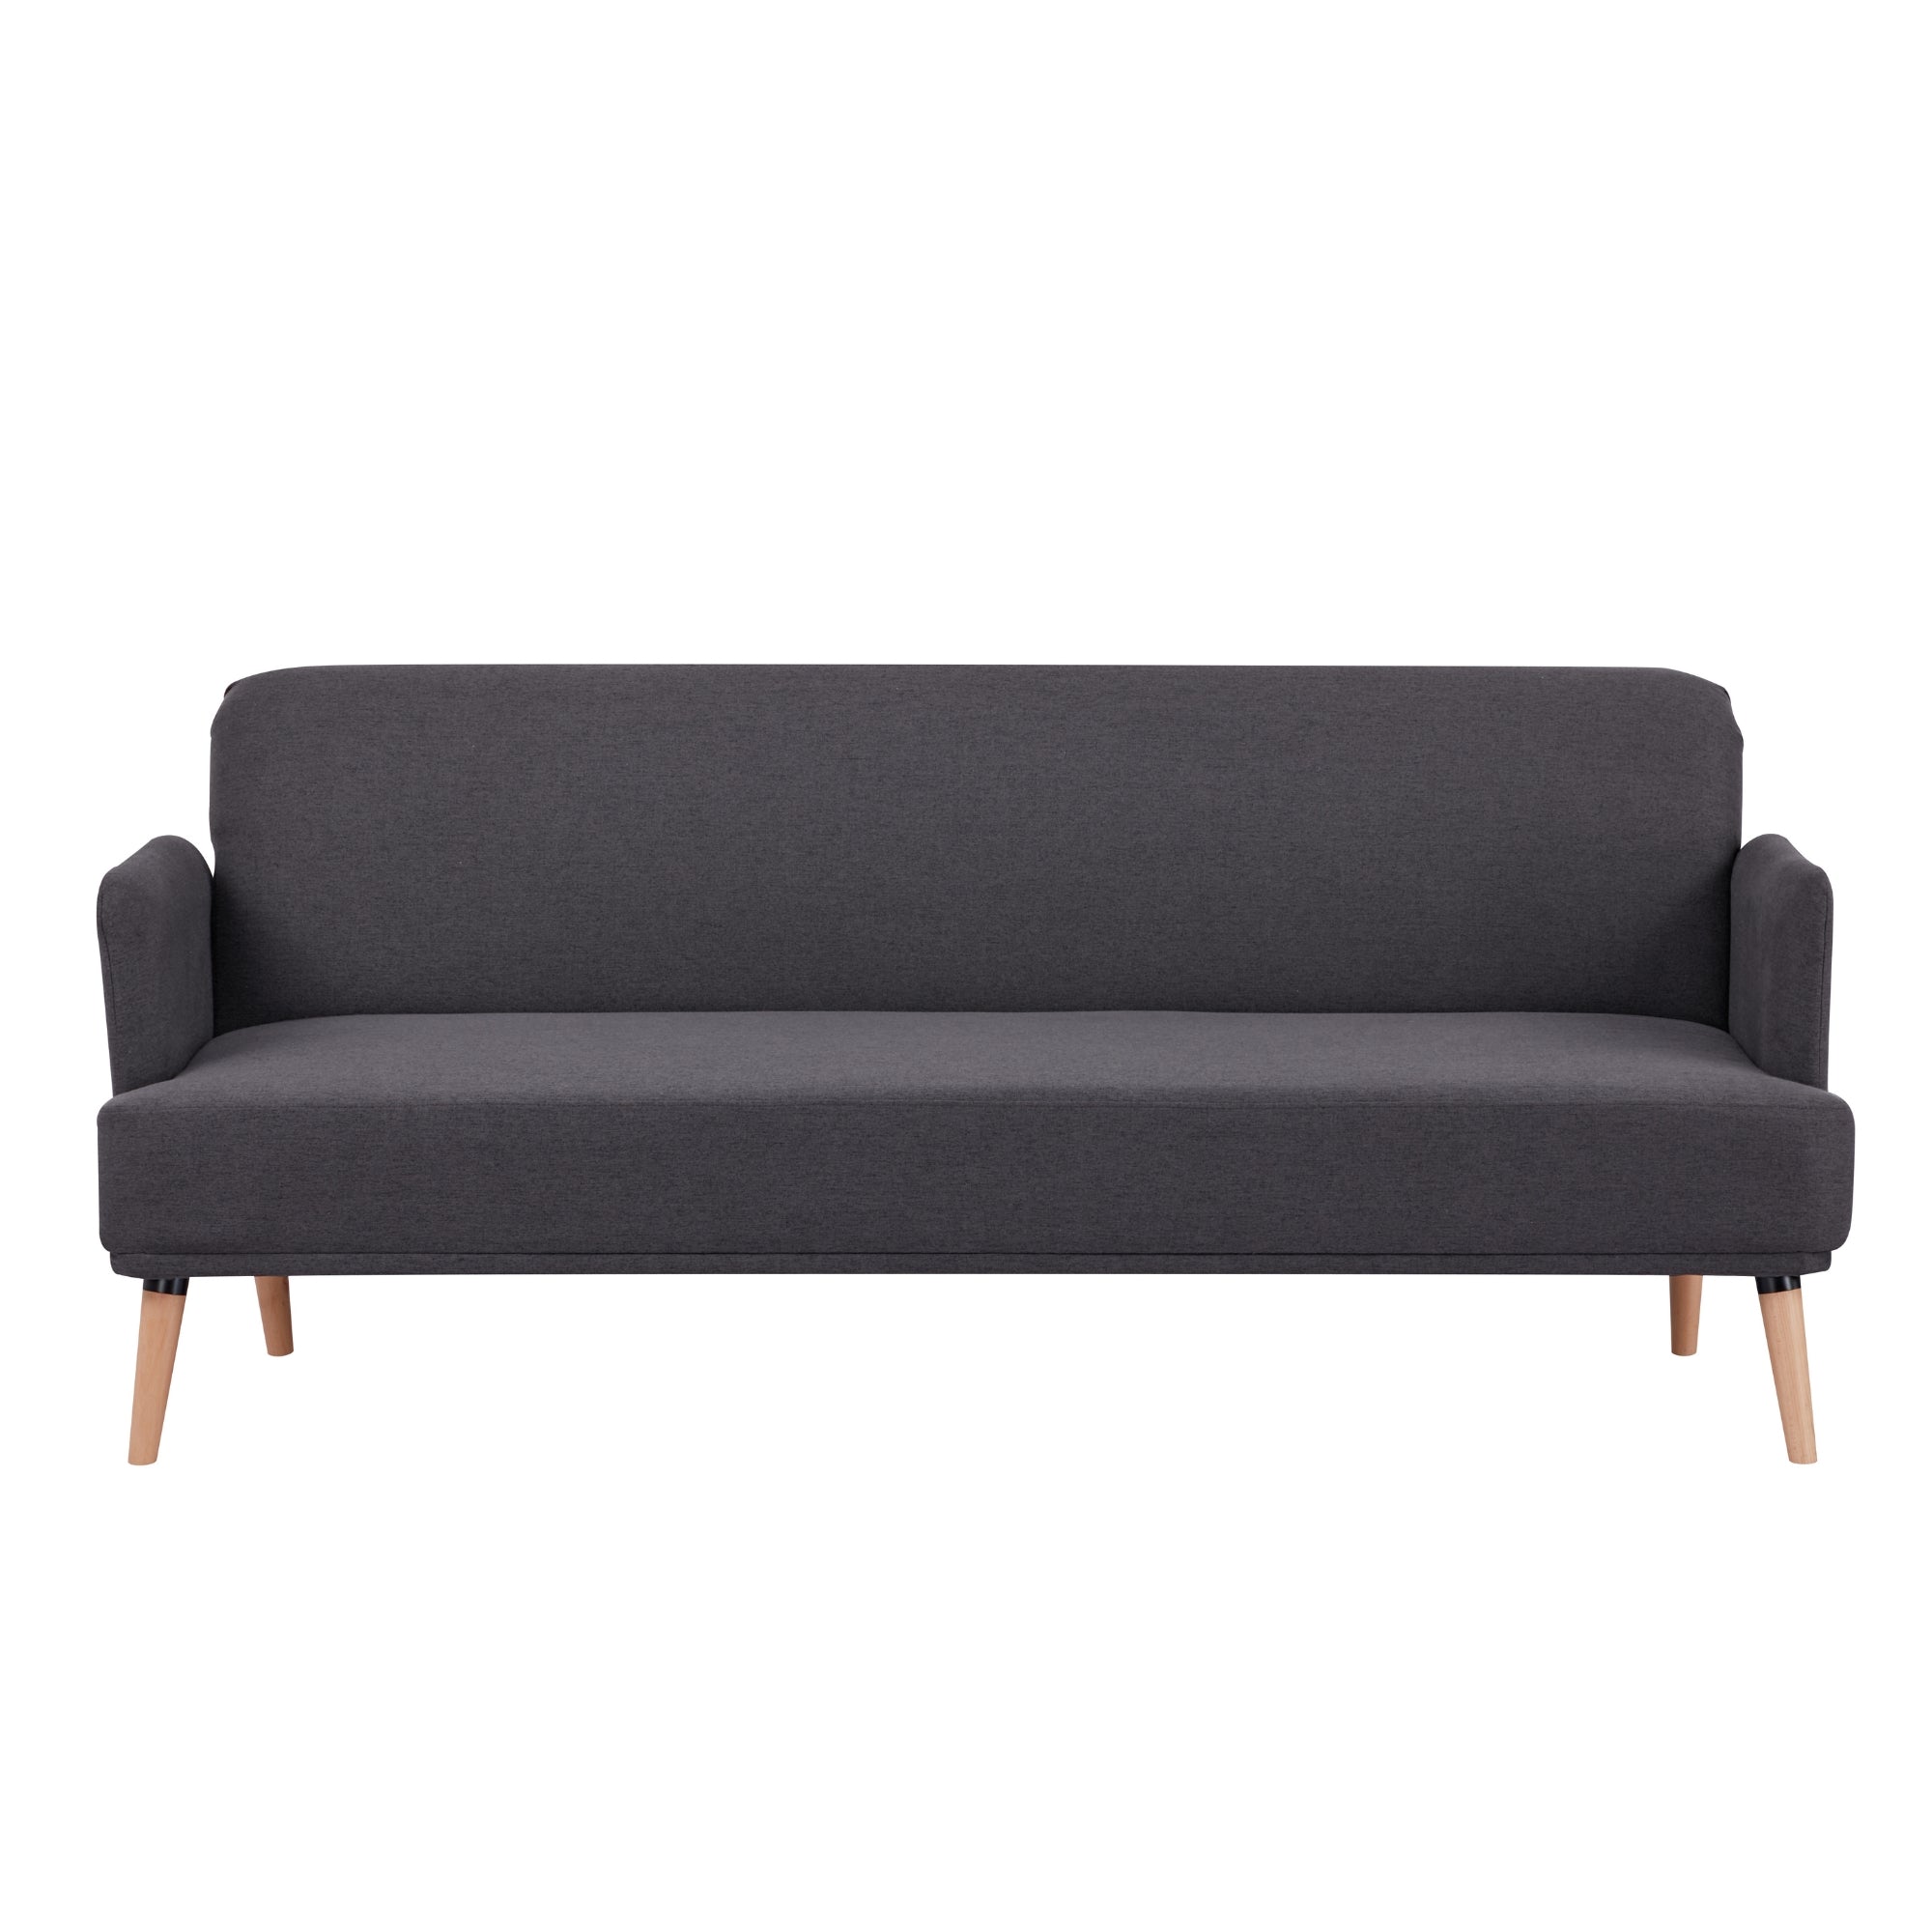 Charcoal 3-Seater Fabric Futon Sofa Bed, Foam Support